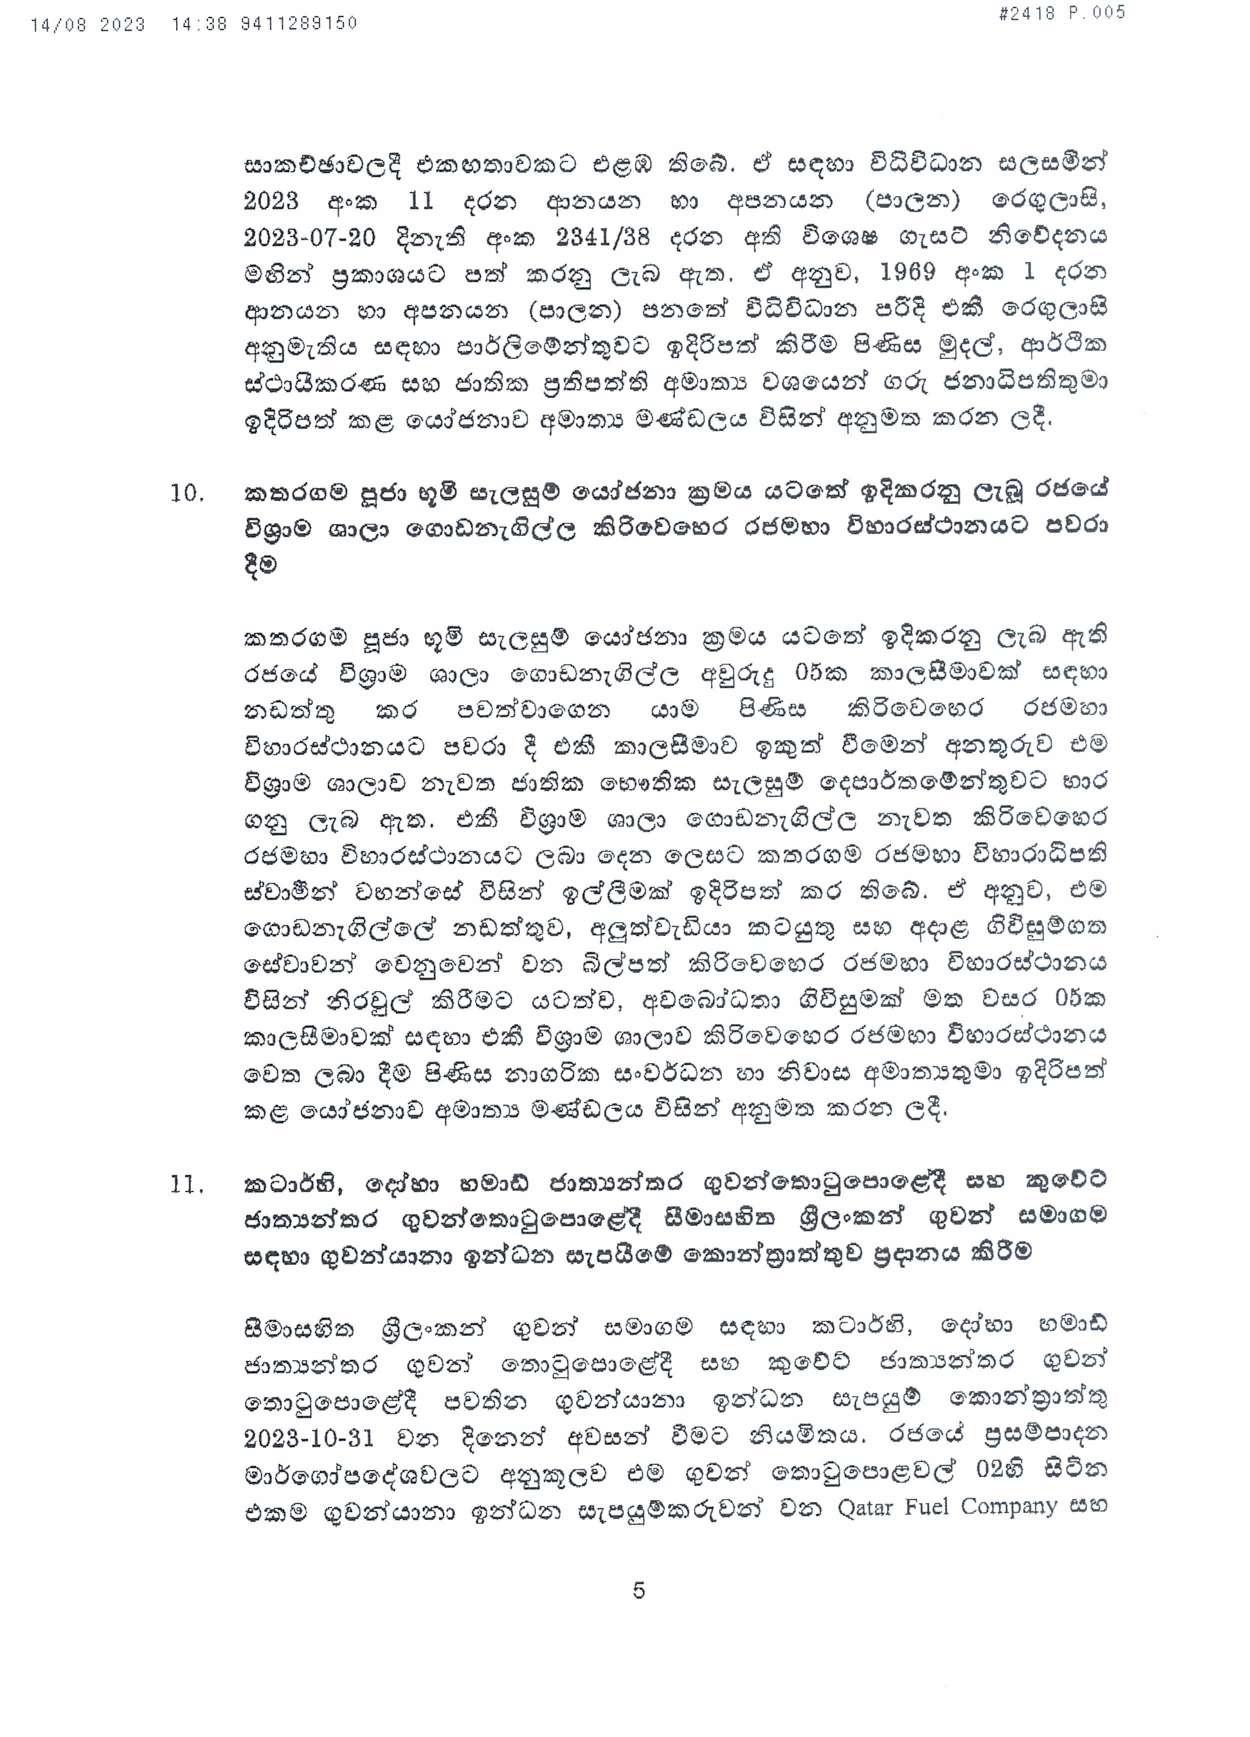 Cabinet Decision on 14.08.2023 page 005